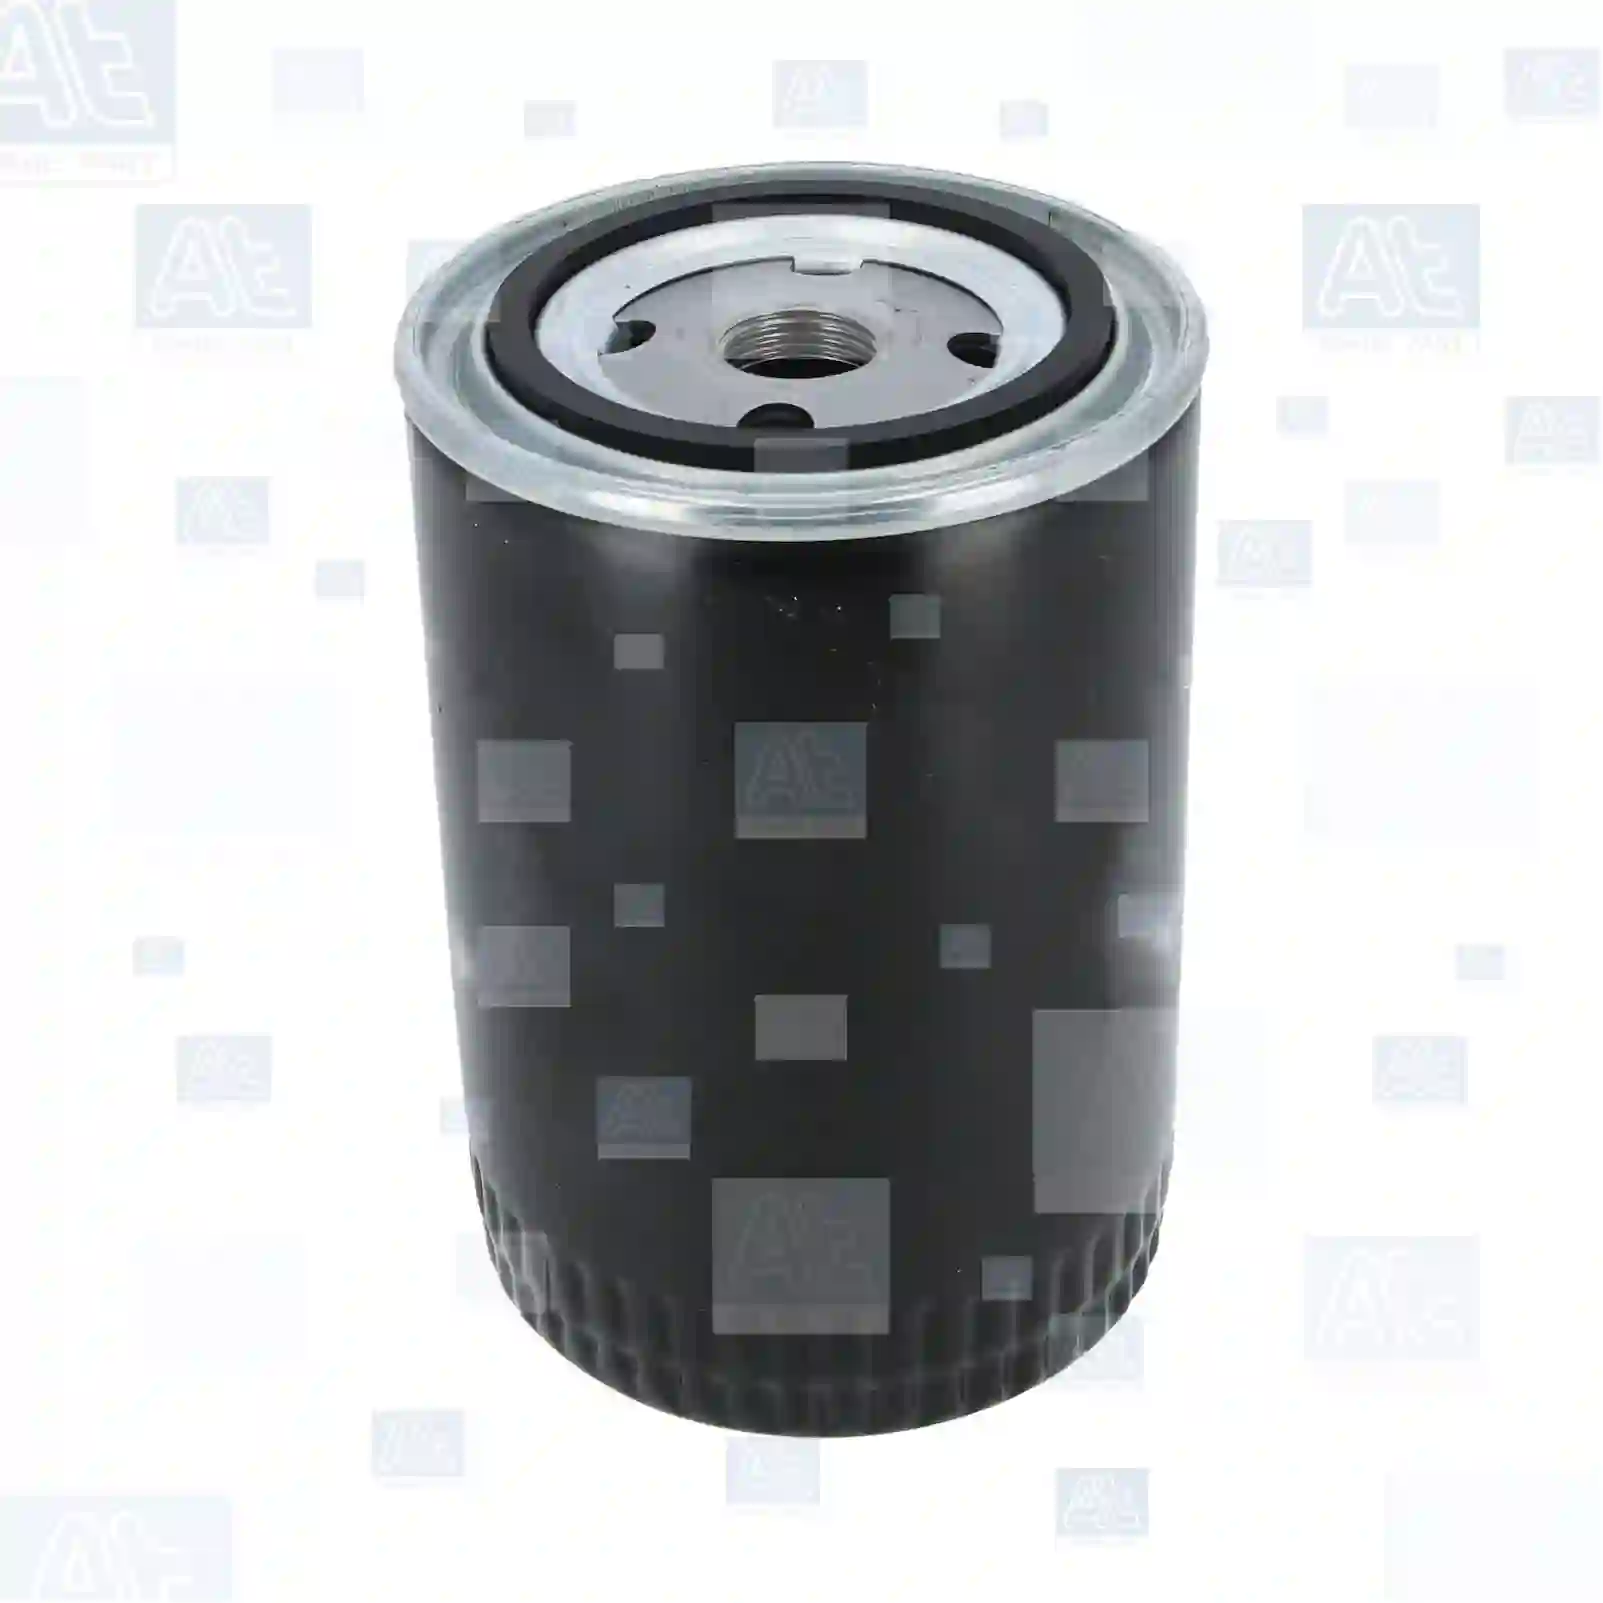 Oil filter, 77700604, 00592602, 105000603000, 37064000, 451700000, 068115561, 068115561B, 068115561C, 7984460, 93156363, 1109A7, 1109F1, 1109G9, 1109K5, 1109V3, 24119014A, 1500932, 1560041010, 42511834, F238202310110, 01354823, 01930328, 01930329, 01930766, 04119015, 05926021, 62703506, 72370000, 1037150, 1318700, 1318701, 1495704, 1498028, 1523494, 1794466, 3917694, 5003232, 5012554, 5012580, 5013148, 9613327, DNP557780, 5574459, 5575840, 5579970, 6435675, 6436749, 6438121, 7984460, 7984655, 7984844, 7984870, 93156304, 93156363, 93156390, 93156952, 9830607, 9975153, 25011243, 7984303, 7984460, 7984844, 93156363, 9975243, 0009830624, 15461-551-305, 15461-551-315, 01164626, 01174416, 244191501, 82220425, 82232108, 82241613, 485GB1138, 0021844001, 15208-43G00, 15208-65001, 15208-65002, 15208-65010, 15208-65011, 15208-65012, 15208-65014, 15208-65016, 15208-65210, 15208-65601, 15208-G4300, 15208-G9903, 15208-V4960, 15208-W1120, 15208-W1123, 15208-W3401, 15208-Y9700, A5208-W3403, 3448991, 3448992, 603362, 603372, 7984229, 7984655, 1109A7, 1109F1, 1109G9, 1109K5, 1109V3, 90110720301, 90110720302, 90110720305, 90110720309, 90110720322, 0000314914, 0005151017, 0024151017, 0770102280, 5000040870, 5000044064, 5000044499, 5000044959, 6005019754, 7701006374, 554329, 555329, A37189, BFF6535, BFF65353, ERC1444, GFE116, 244191300, 244191500, 068115561B, 15208-32225, 15208-32255, 15208-7F400, 15600-40010, 15600-41020, 15600-44010, 15600-50010, 15601-30010, 15601-41010, 15601-42020, 15601-44011, 16500-41020, 120190212001, 15205W1120, 1520805001, 1520805D00, 1520805D01, 1520843G00, 1520843G0A, 1520865000, 1520865004, 1520865005, 1520865011, 1520865012, 1520865014, 1520865016, 152087F400, 152087T400, 15208W1115, 15208W1120, 15208W1120B, 15208W1123, 15208W3403, 92287Q7332, BF20805D02, FL20805D01, 1257492, 12574927, 1328126, 13281611, 4804651, 4840740, 705097, 008115561, 028115561B, 028115561E, 068115561, 068115561A, 068115561B, 068115561C, 068115561E, 068115561G, 068115568B, 078115561E, 168115561A, 681155613 ||  77700604 At Spare Part | Engine, Accelerator Pedal, Camshaft, Connecting Rod, Crankcase, Crankshaft, Cylinder Head, Engine Suspension Mountings, Exhaust Manifold, Exhaust Gas Recirculation, Filter Kits, Flywheel Housing, General Overhaul Kits, Engine, Intake Manifold, Oil Cleaner, Oil Cooler, Oil Filter, Oil Pump, Oil Sump, Piston & Liner, Sensor & Switch, Timing Case, Turbocharger, Cooling System, Belt Tensioner, Coolant Filter, Coolant Pipe, Corrosion Prevention Agent, Drive, Expansion Tank, Fan, Intercooler, Monitors & Gauges, Radiator, Thermostat, V-Belt / Timing belt, Water Pump, Fuel System, Electronical Injector Unit, Feed Pump, Fuel Filter, cpl., Fuel Gauge Sender,  Fuel Line, Fuel Pump, Fuel Tank, Injection Line Kit, Injection Pump, Exhaust System, Clutch & Pedal, Gearbox, Propeller Shaft, Axles, Brake System, Hubs & Wheels, Suspension, Leaf Spring, Universal Parts / Accessories, Steering, Electrical System, Cabin Oil filter, 77700604, 00592602, 105000603000, 37064000, 451700000, 068115561, 068115561B, 068115561C, 7984460, 93156363, 1109A7, 1109F1, 1109G9, 1109K5, 1109V3, 24119014A, 1500932, 1560041010, 42511834, F238202310110, 01354823, 01930328, 01930329, 01930766, 04119015, 05926021, 62703506, 72370000, 1037150, 1318700, 1318701, 1495704, 1498028, 1523494, 1794466, 3917694, 5003232, 5012554, 5012580, 5013148, 9613327, DNP557780, 5574459, 5575840, 5579970, 6435675, 6436749, 6438121, 7984460, 7984655, 7984844, 7984870, 93156304, 93156363, 93156390, 93156952, 9830607, 9975153, 25011243, 7984303, 7984460, 7984844, 93156363, 9975243, 0009830624, 15461-551-305, 15461-551-315, 01164626, 01174416, 244191501, 82220425, 82232108, 82241613, 485GB1138, 0021844001, 15208-43G00, 15208-65001, 15208-65002, 15208-65010, 15208-65011, 15208-65012, 15208-65014, 15208-65016, 15208-65210, 15208-65601, 15208-G4300, 15208-G9903, 15208-V4960, 15208-W1120, 15208-W1123, 15208-W3401, 15208-Y9700, A5208-W3403, 3448991, 3448992, 603362, 603372, 7984229, 7984655, 1109A7, 1109F1, 1109G9, 1109K5, 1109V3, 90110720301, 90110720302, 90110720305, 90110720309, 90110720322, 0000314914, 0005151017, 0024151017, 0770102280, 5000040870, 5000044064, 5000044499, 5000044959, 6005019754, 7701006374, 554329, 555329, A37189, BFF6535, BFF65353, ERC1444, GFE116, 244191300, 244191500, 068115561B, 15208-32225, 15208-32255, 15208-7F400, 15600-40010, 15600-41020, 15600-44010, 15600-50010, 15601-30010, 15601-41010, 15601-42020, 15601-44011, 16500-41020, 120190212001, 15205W1120, 1520805001, 1520805D00, 1520805D01, 1520843G00, 1520843G0A, 1520865000, 1520865004, 1520865005, 1520865011, 1520865012, 1520865014, 1520865016, 152087F400, 152087T400, 15208W1115, 15208W1120, 15208W1120B, 15208W1123, 15208W3403, 92287Q7332, BF20805D02, FL20805D01, 1257492, 12574927, 1328126, 13281611, 4804651, 4840740, 705097, 008115561, 028115561B, 028115561E, 068115561, 068115561A, 068115561B, 068115561C, 068115561E, 068115561G, 068115568B, 078115561E, 168115561A, 681155613 ||  77700604 At Spare Part | Engine, Accelerator Pedal, Camshaft, Connecting Rod, Crankcase, Crankshaft, Cylinder Head, Engine Suspension Mountings, Exhaust Manifold, Exhaust Gas Recirculation, Filter Kits, Flywheel Housing, General Overhaul Kits, Engine, Intake Manifold, Oil Cleaner, Oil Cooler, Oil Filter, Oil Pump, Oil Sump, Piston & Liner, Sensor & Switch, Timing Case, Turbocharger, Cooling System, Belt Tensioner, Coolant Filter, Coolant Pipe, Corrosion Prevention Agent, Drive, Expansion Tank, Fan, Intercooler, Monitors & Gauges, Radiator, Thermostat, V-Belt / Timing belt, Water Pump, Fuel System, Electronical Injector Unit, Feed Pump, Fuel Filter, cpl., Fuel Gauge Sender,  Fuel Line, Fuel Pump, Fuel Tank, Injection Line Kit, Injection Pump, Exhaust System, Clutch & Pedal, Gearbox, Propeller Shaft, Axles, Brake System, Hubs & Wheels, Suspension, Leaf Spring, Universal Parts / Accessories, Steering, Electrical System, Cabin